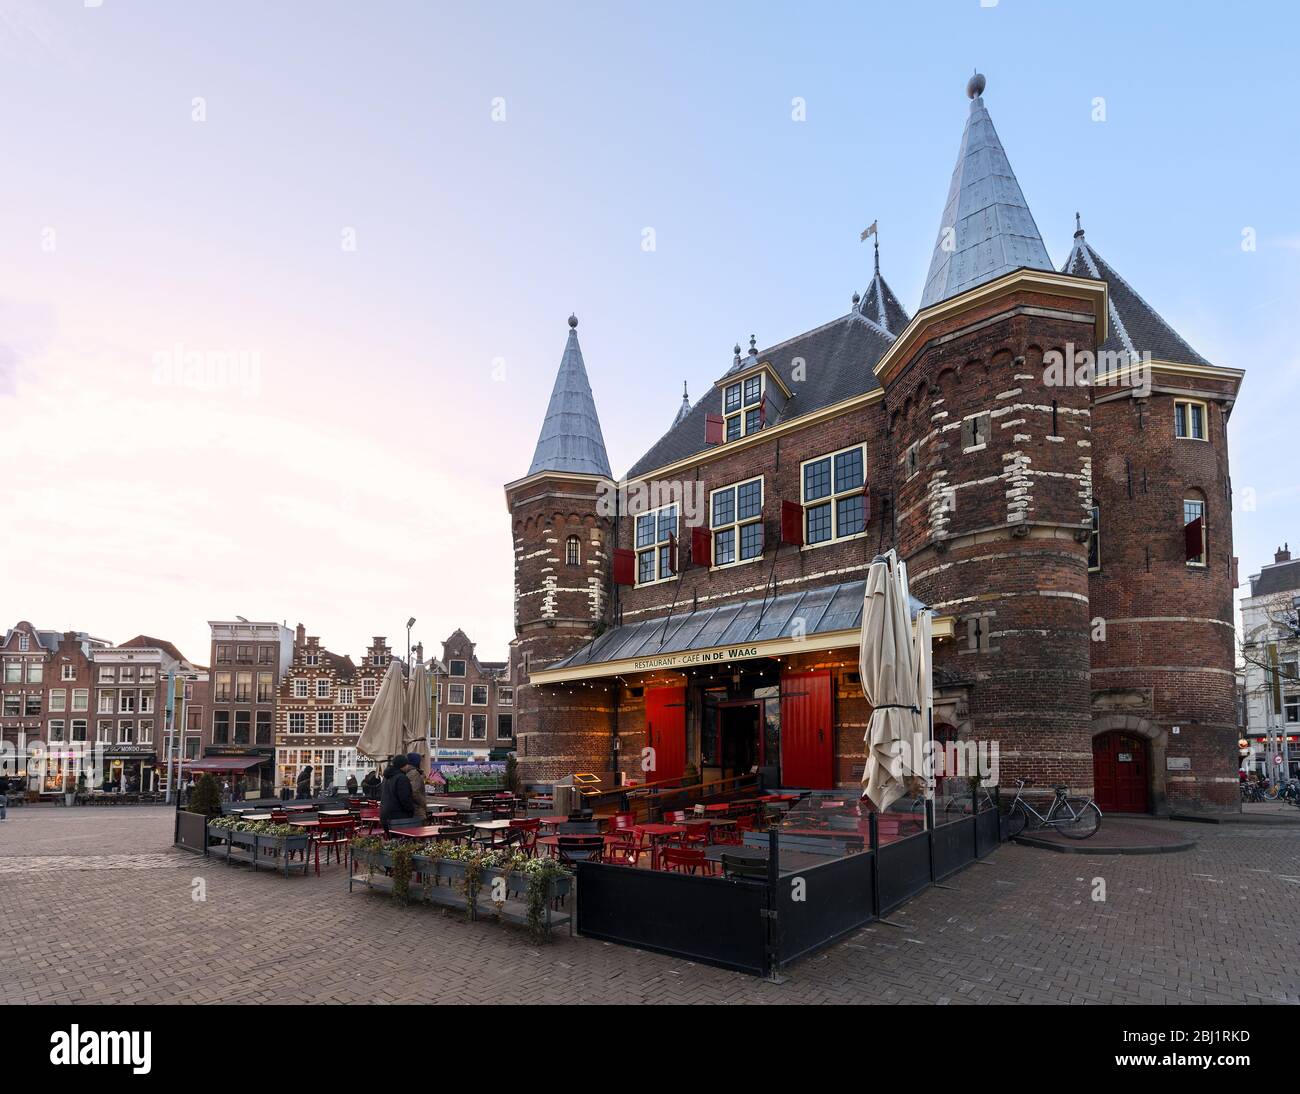 The famous gate house landmark now resturant Cafe in de Waag, Amsterdam, Netherlands. Stock Photo